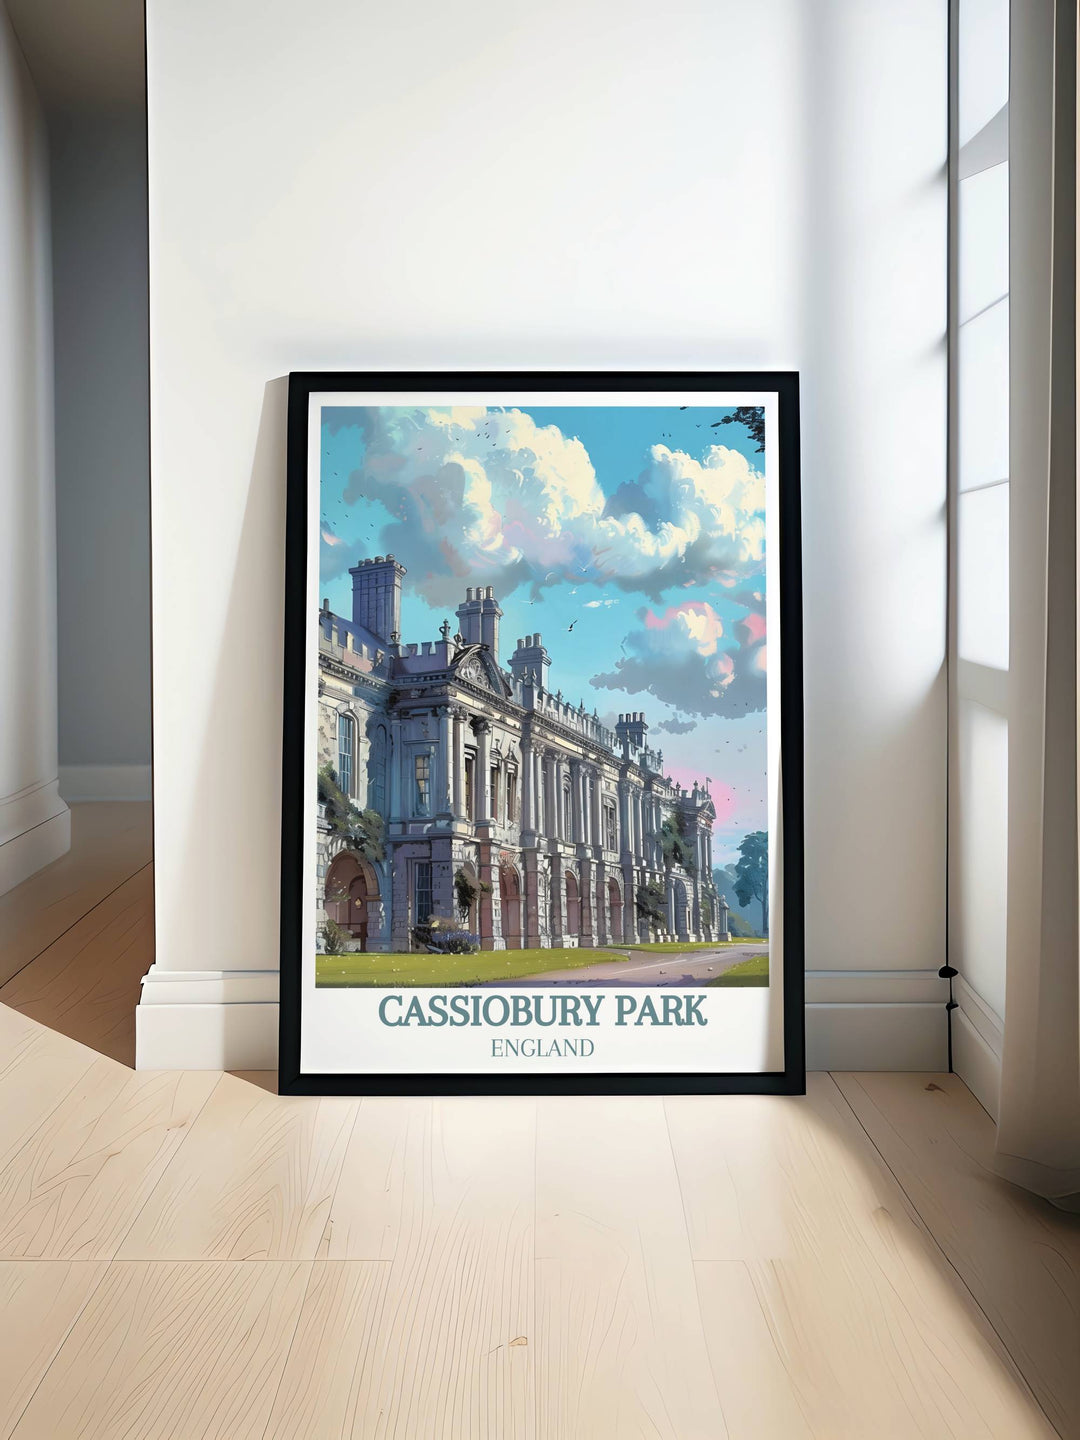 Cassiobury Park Mansion seen through the lush foliage of the park, blending natural and man-made beauty in an exquisite art piece